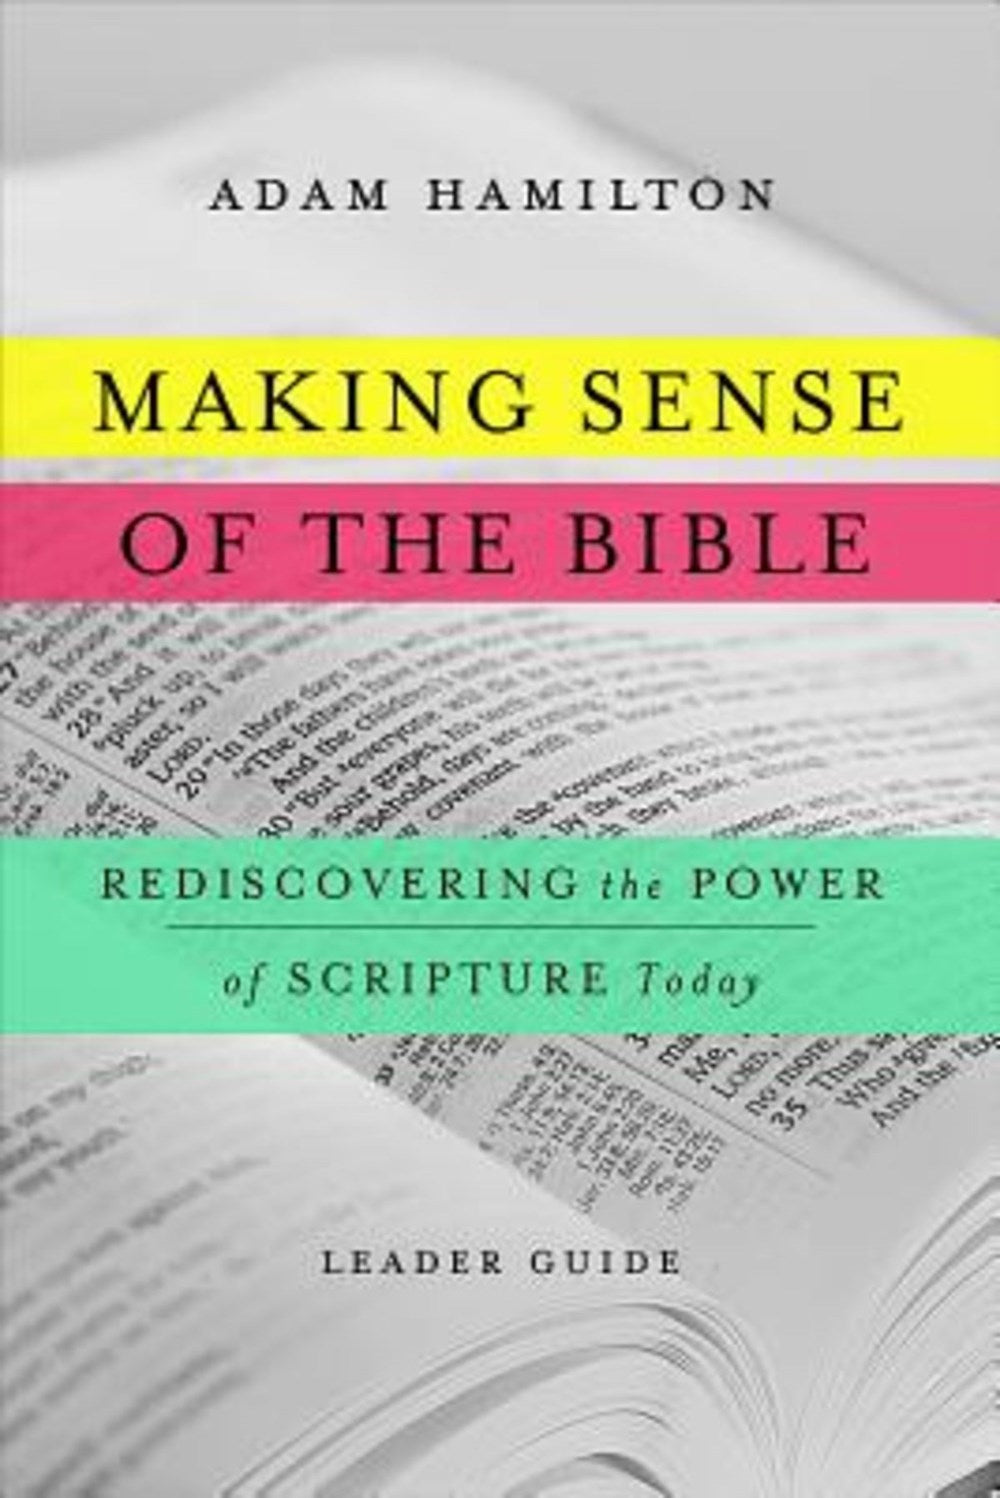 Making Sense of the Bible Leader Guide